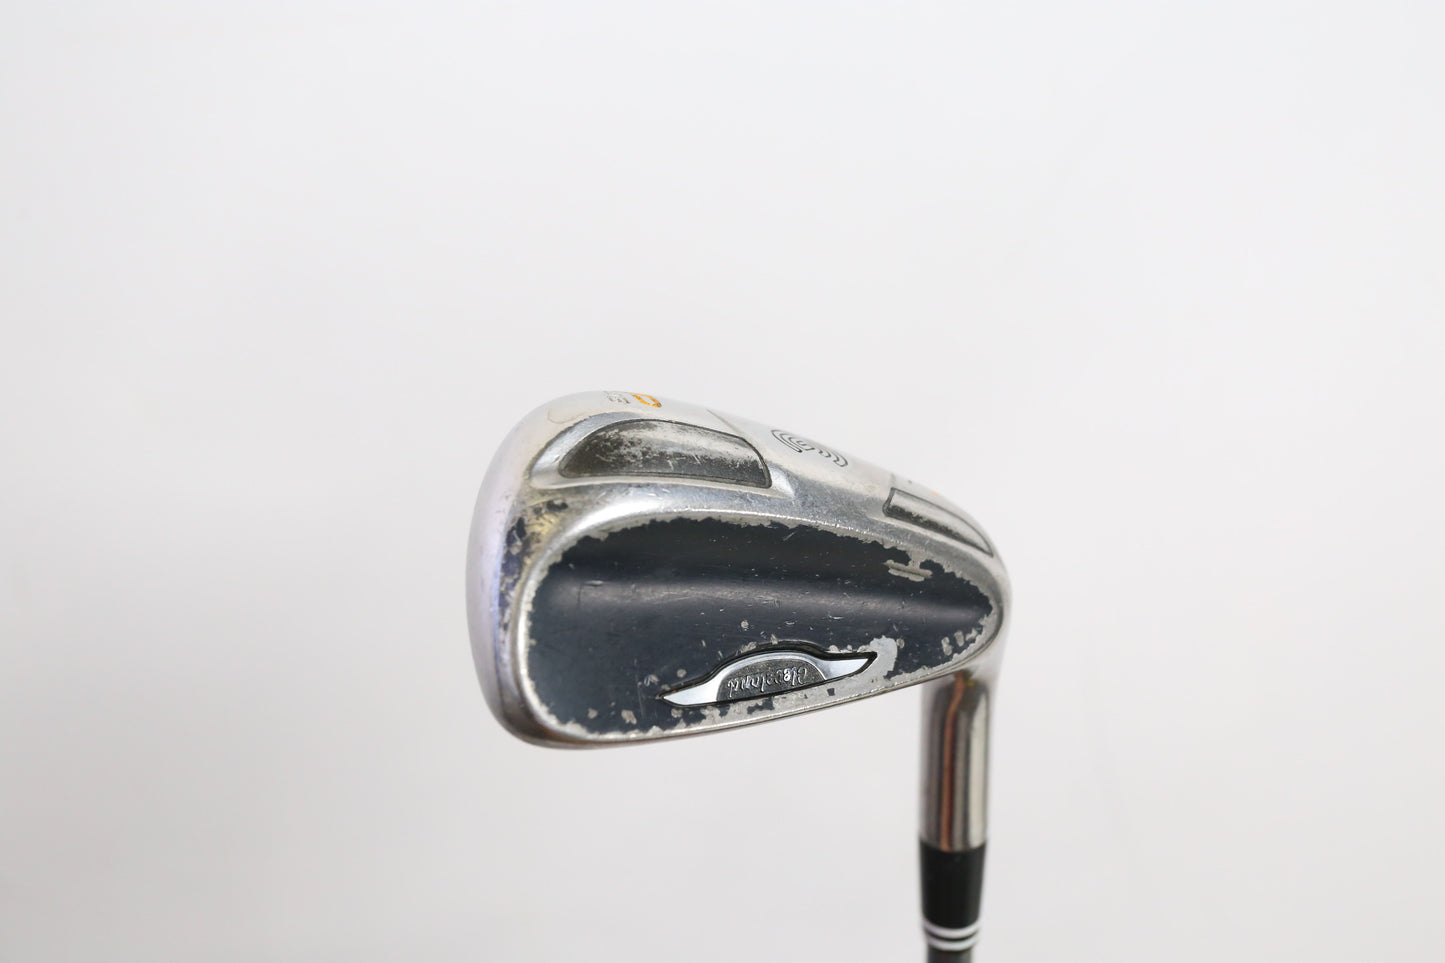 Used Cleveland HiBore XLi Pitching Wedge - Right-Handed - 45 Degrees - Regular Flex